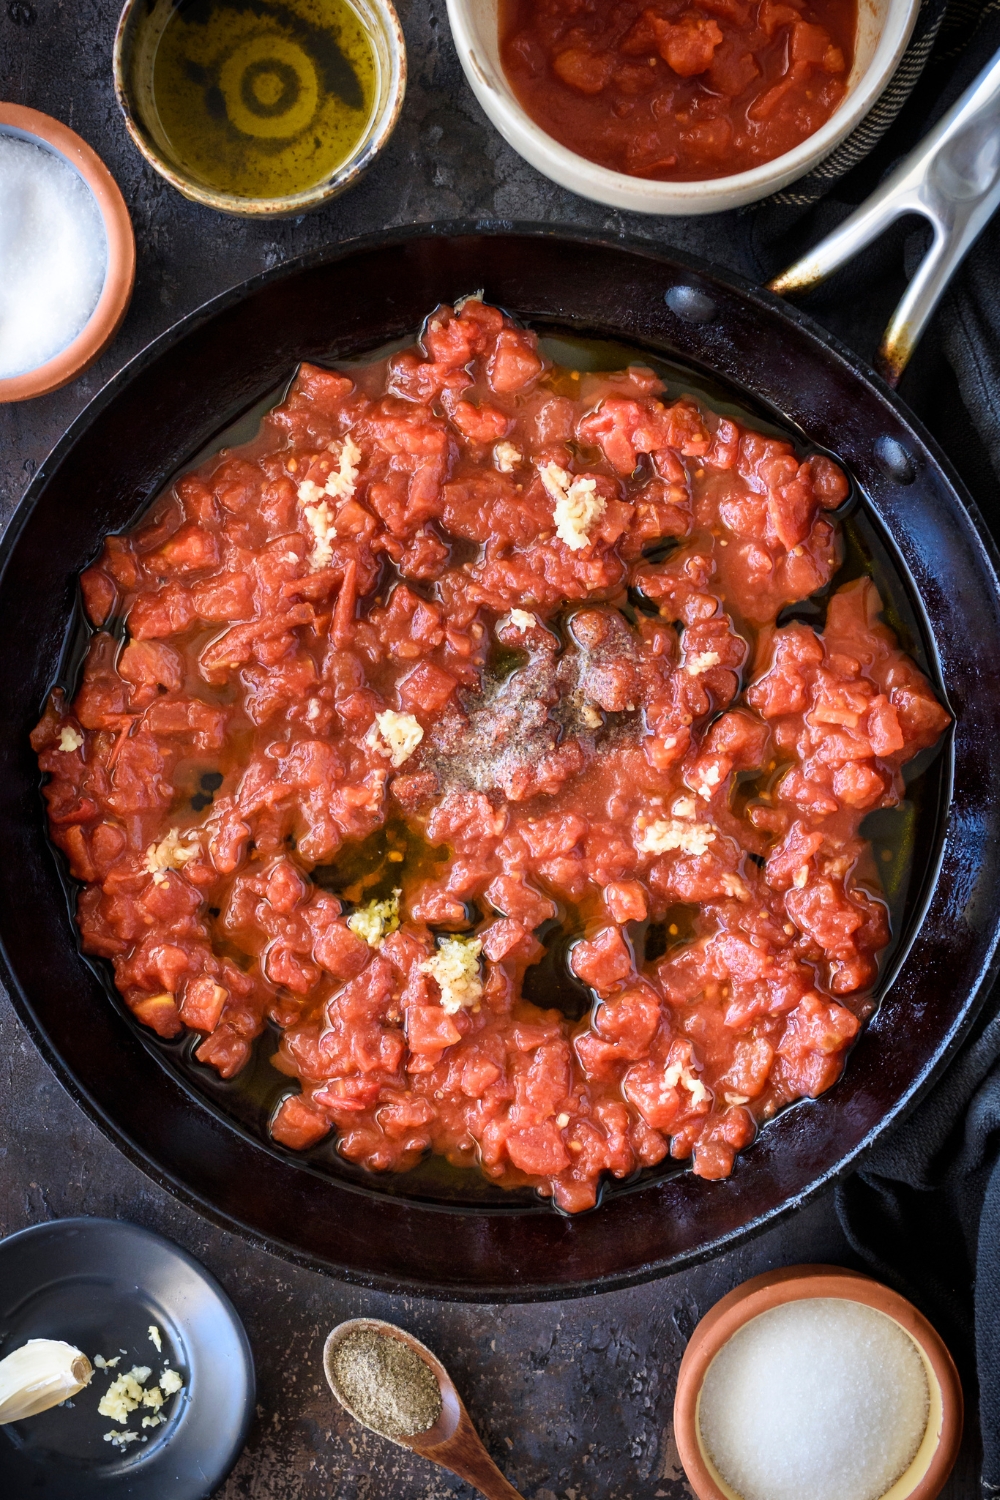 A skillet with canned tomatoes in juices cooking with garlic and seasonings.